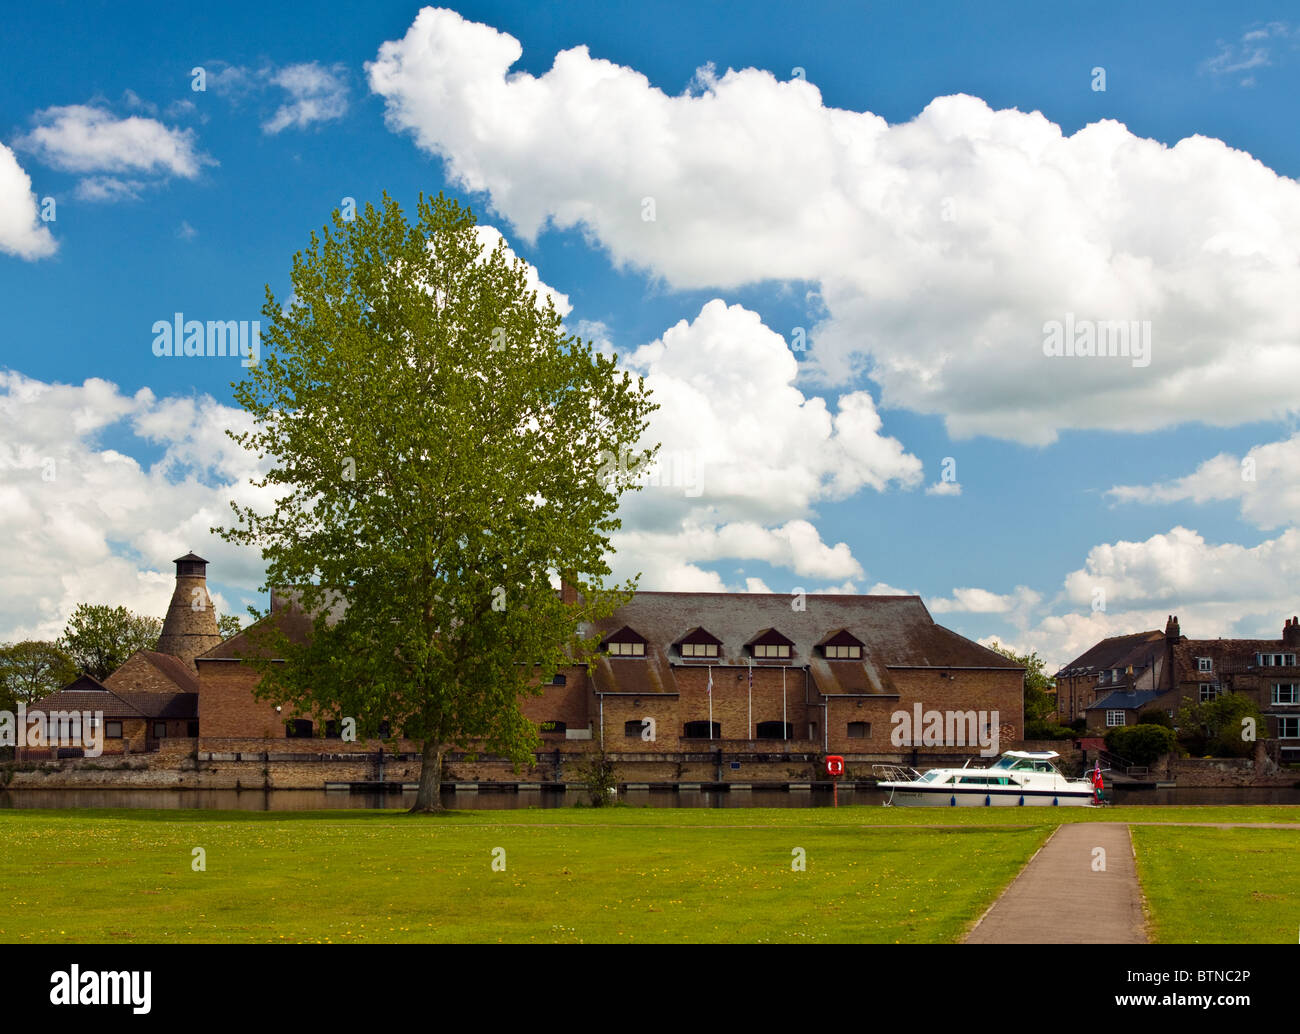 A Motor Boat on a river in St Neots Cambridgeshire with a building in the background Stock Photo